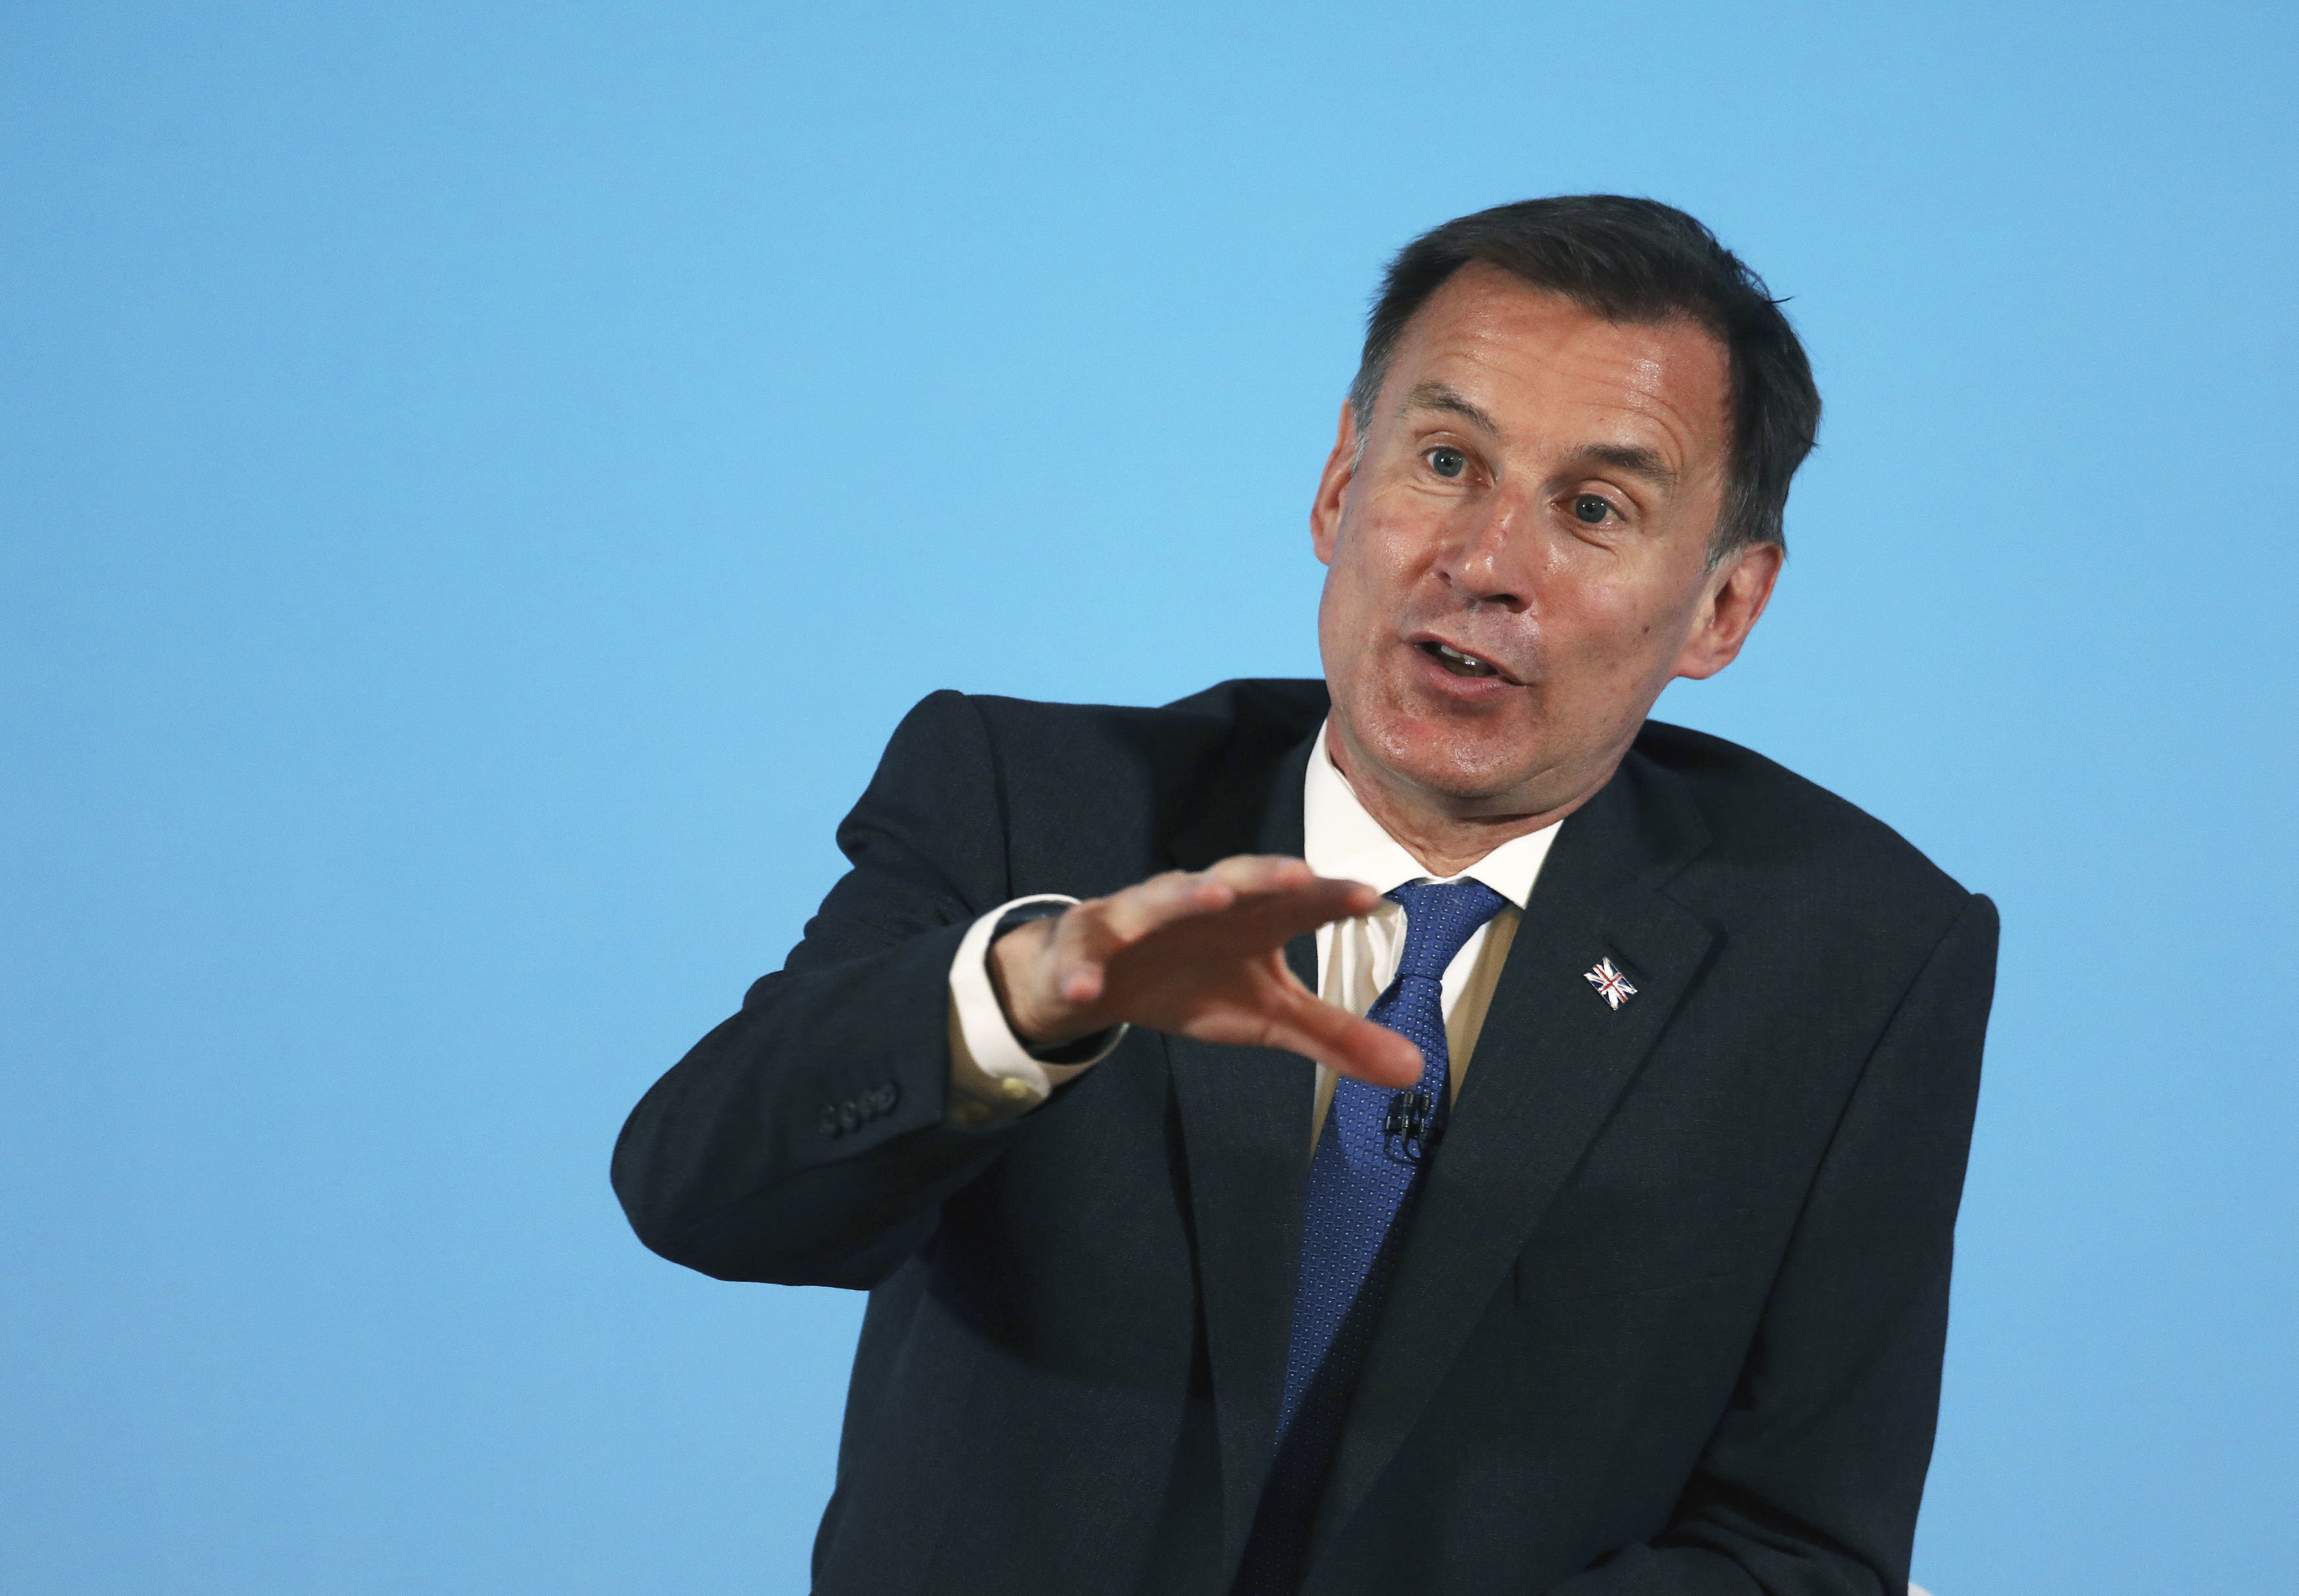 Tory leadership hopeful Jeremy Hunt said the immigration system should maintain access to permanent and seasonal workers for Scottish farming.